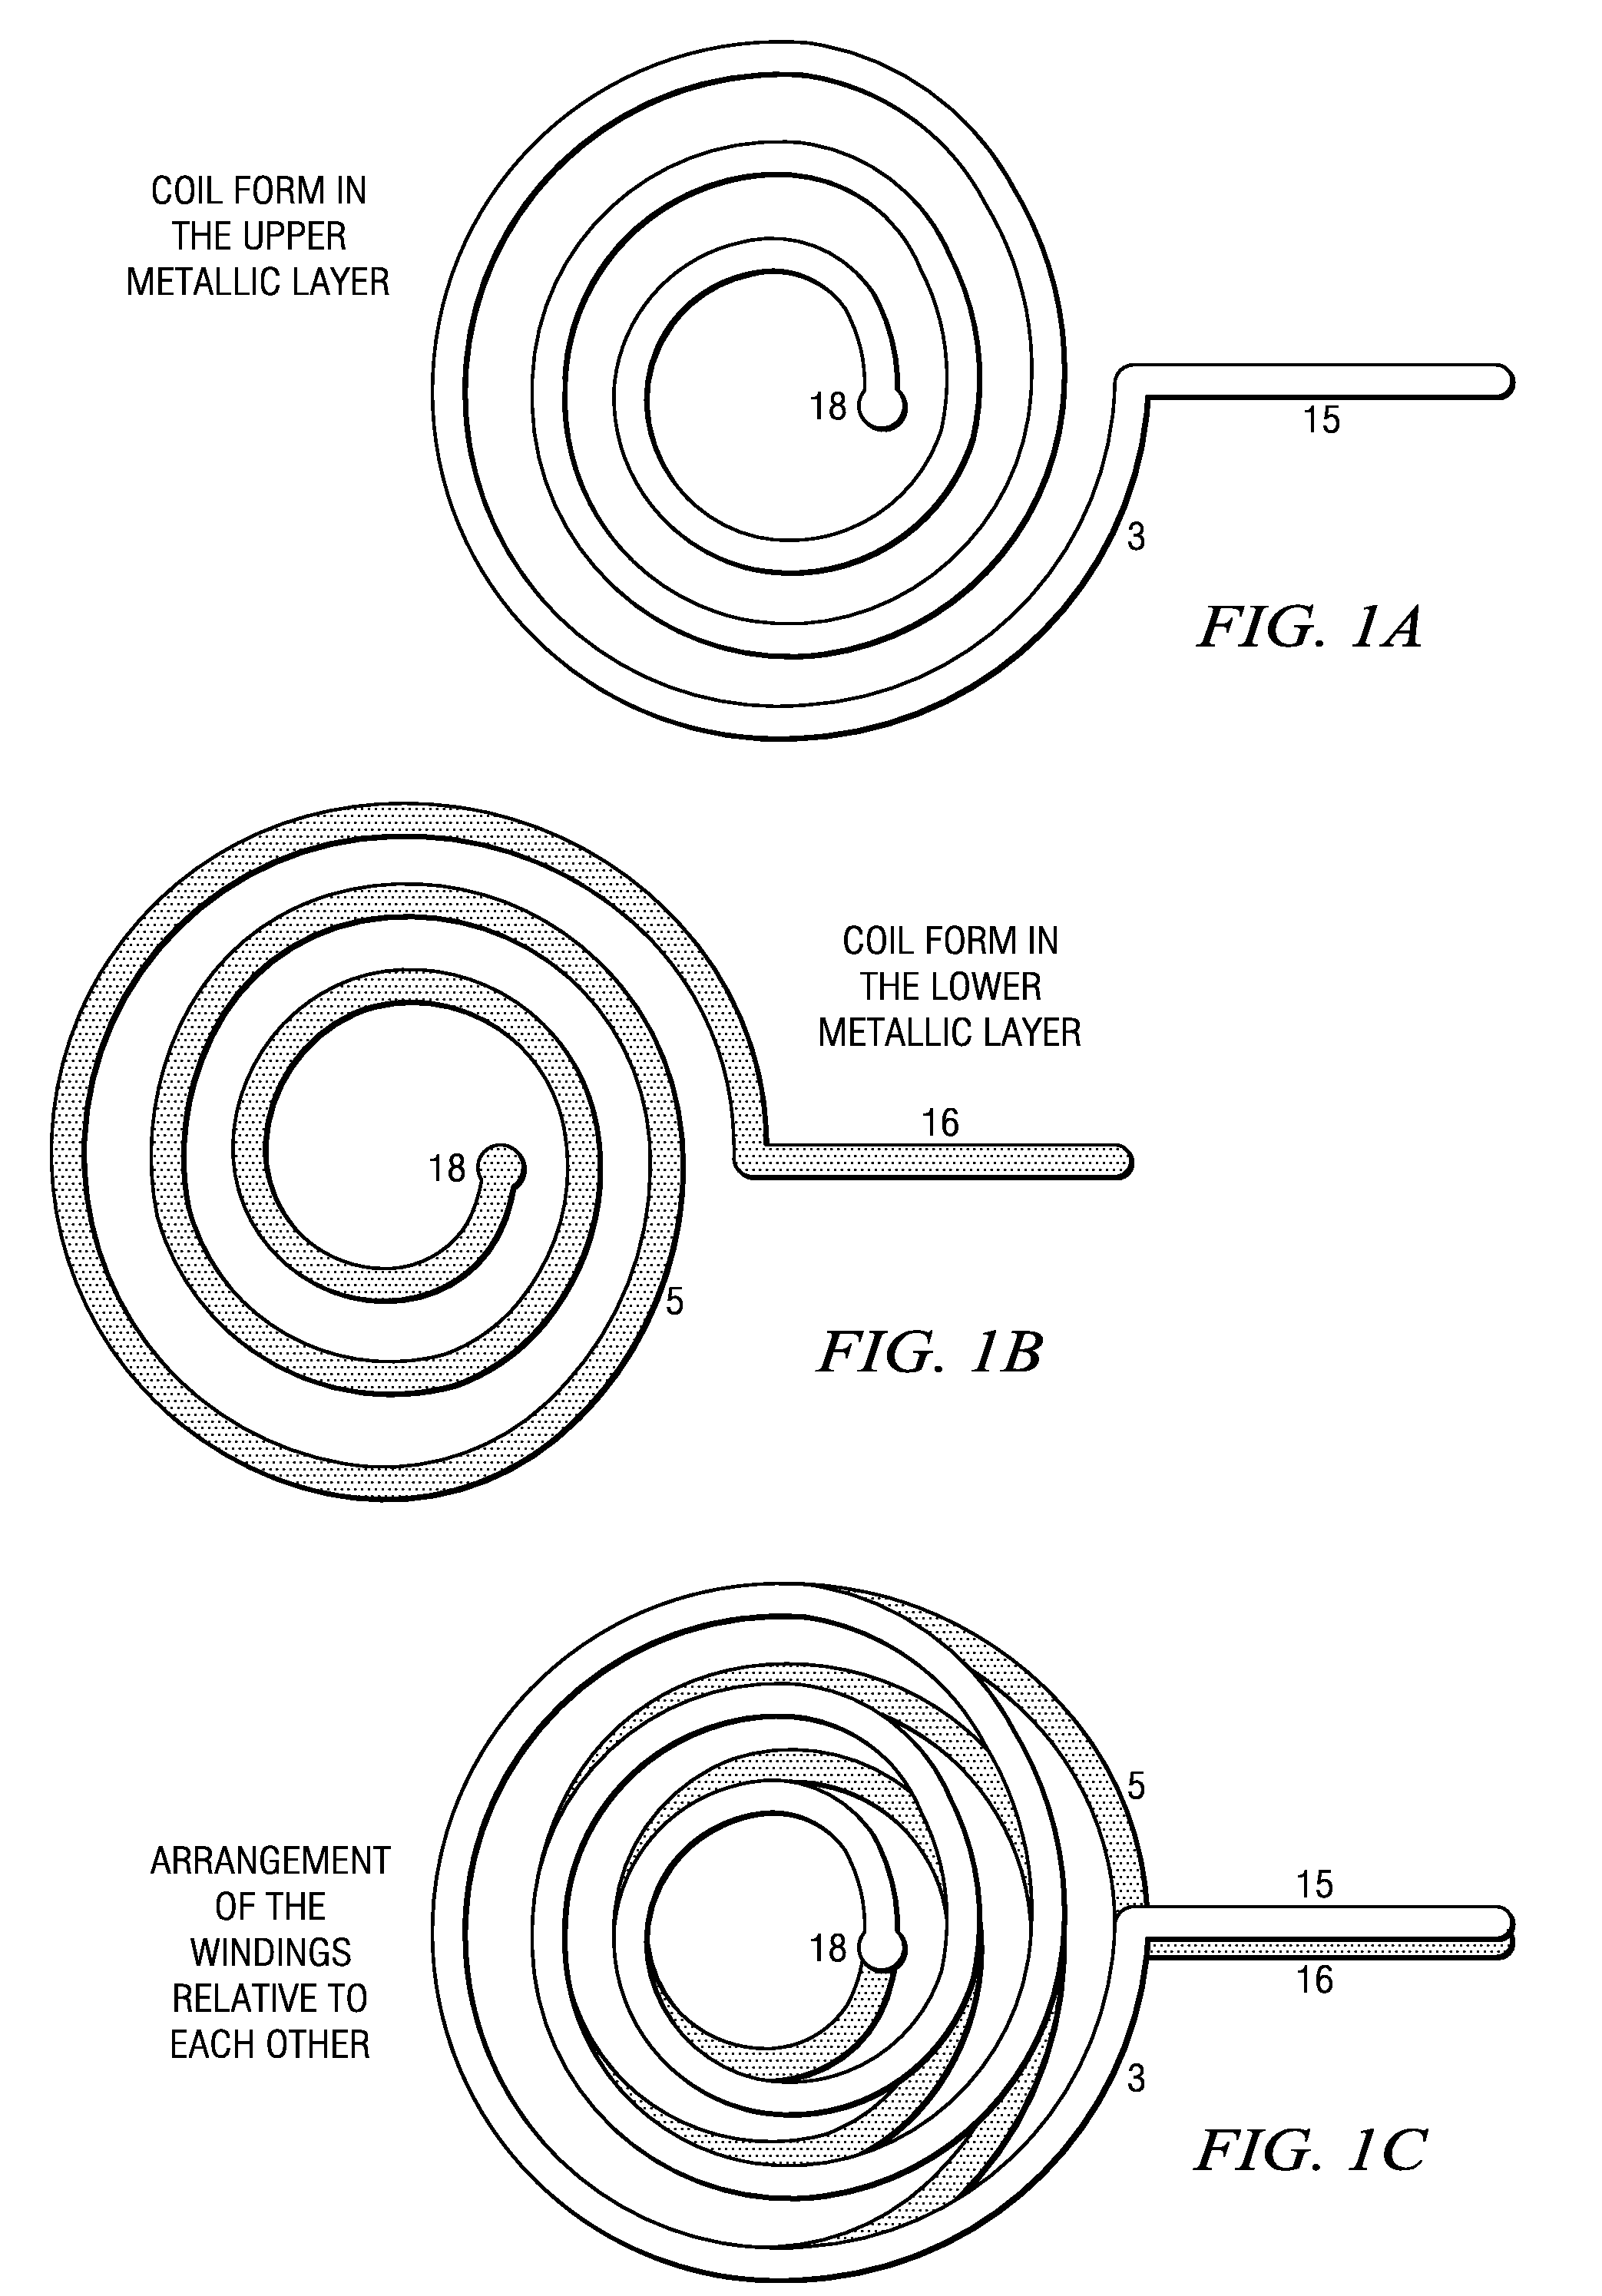 Method of constructing inductors and transformers